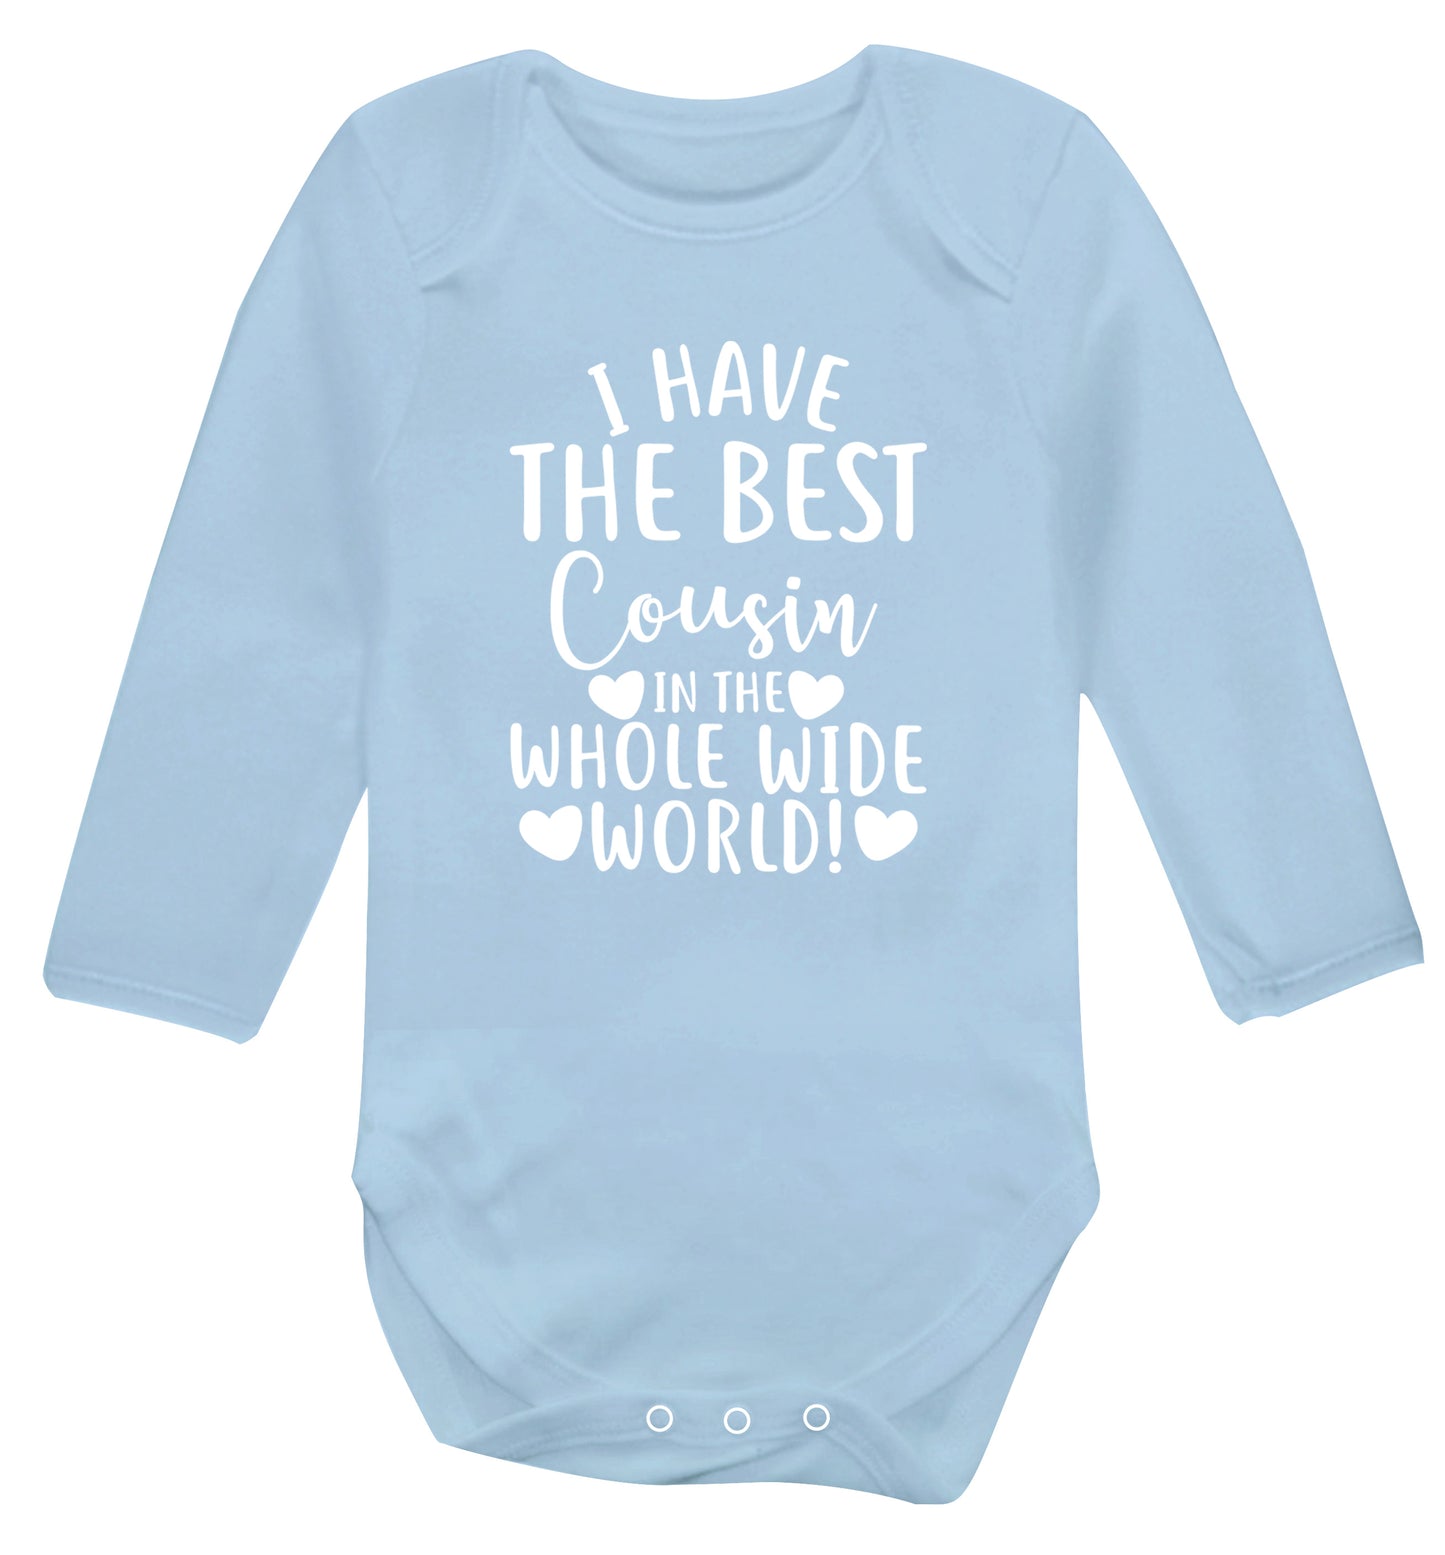 I have the best cousin in the whole wide world! Baby Vest long sleeved pale blue 6-12 months